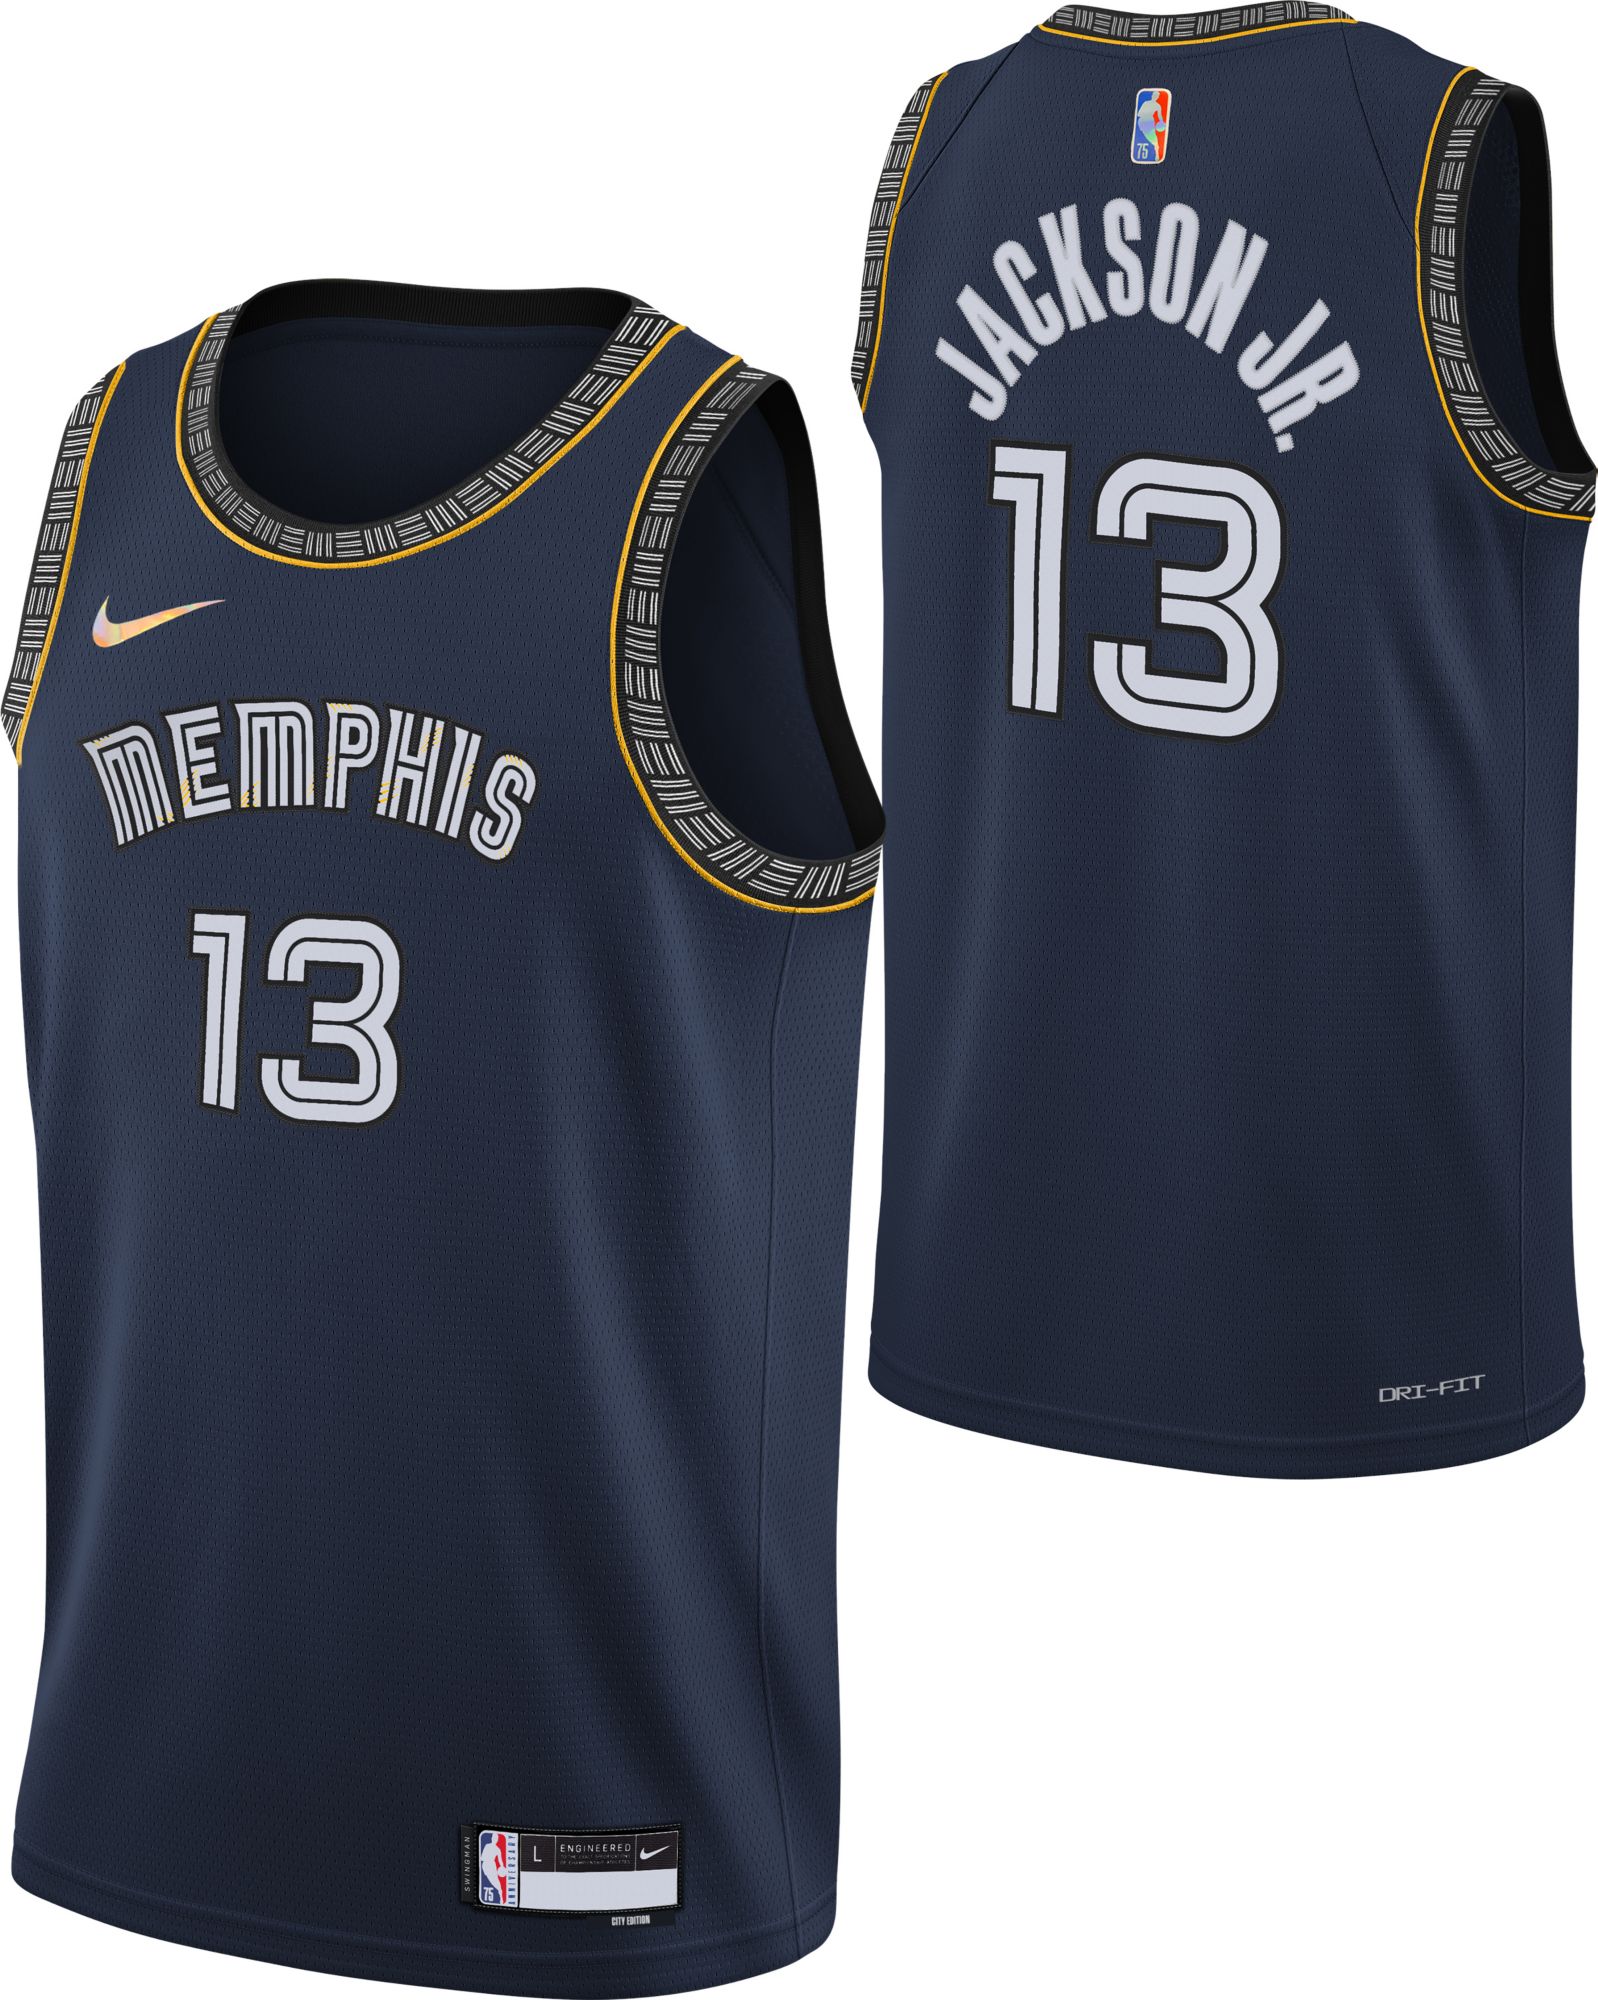 Grizzlies youth jersey